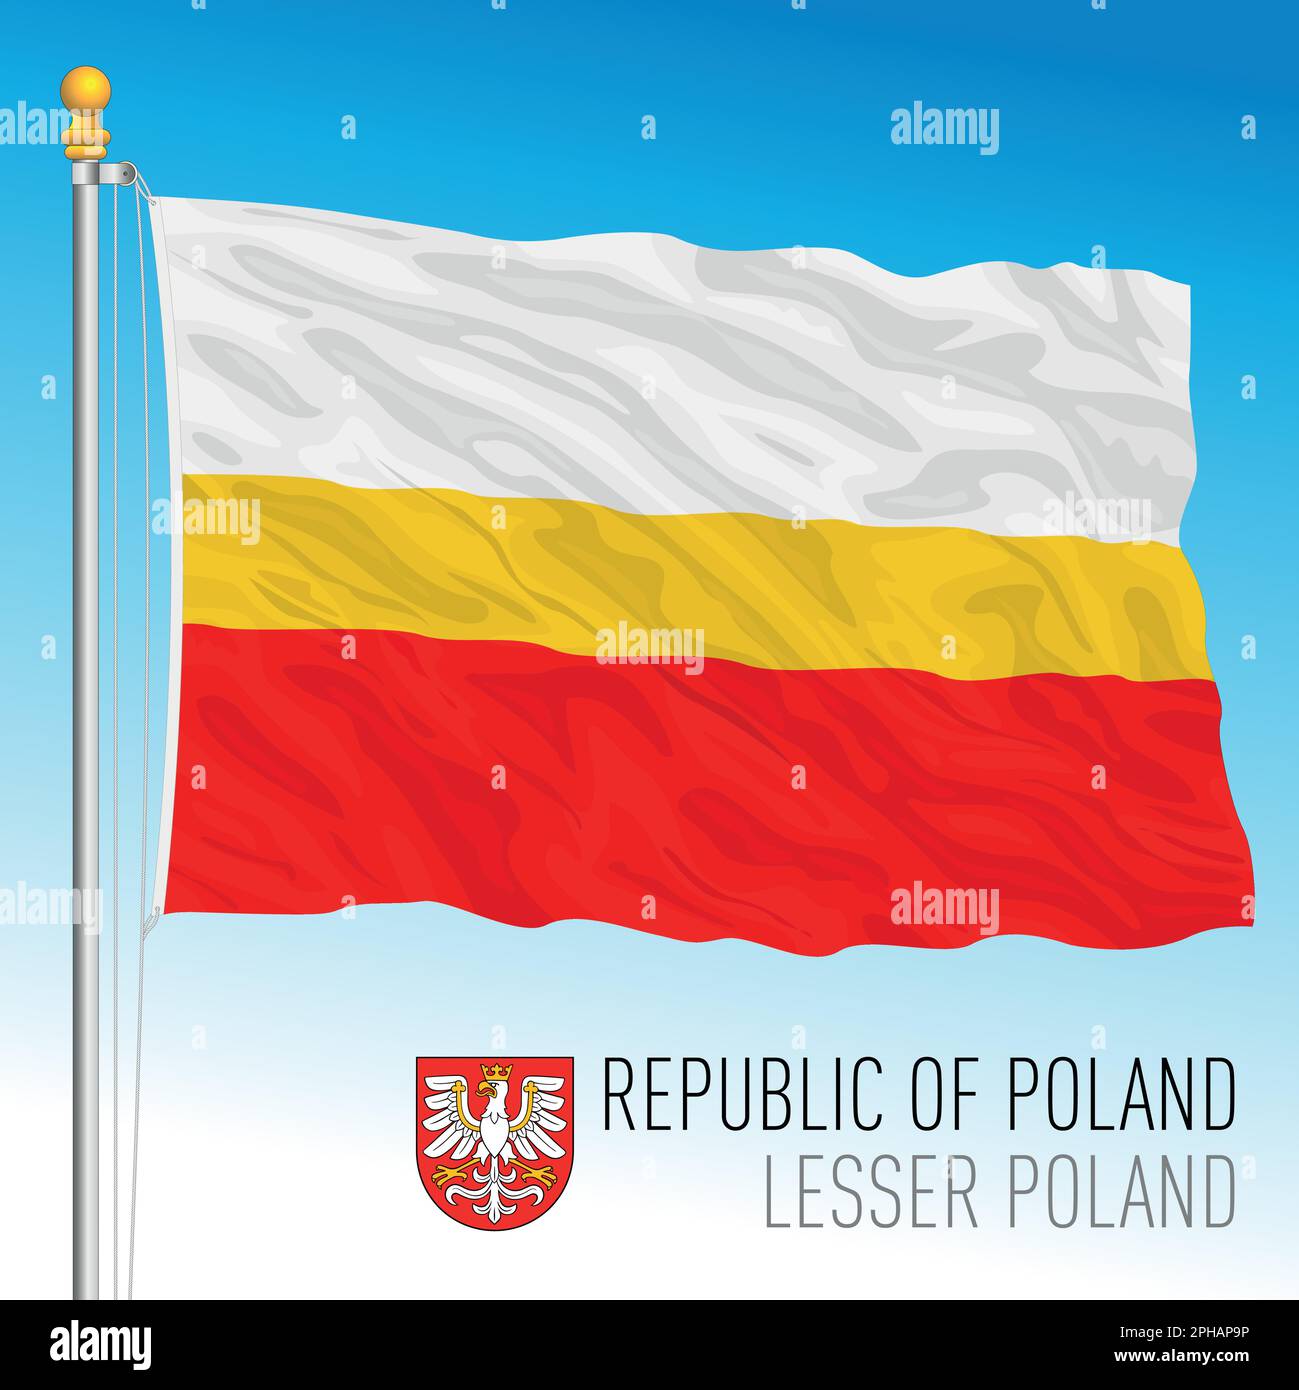 Lesser Poland regional flag and coat of arms, Republic of Poland, european country, vector illustration Stock Vector